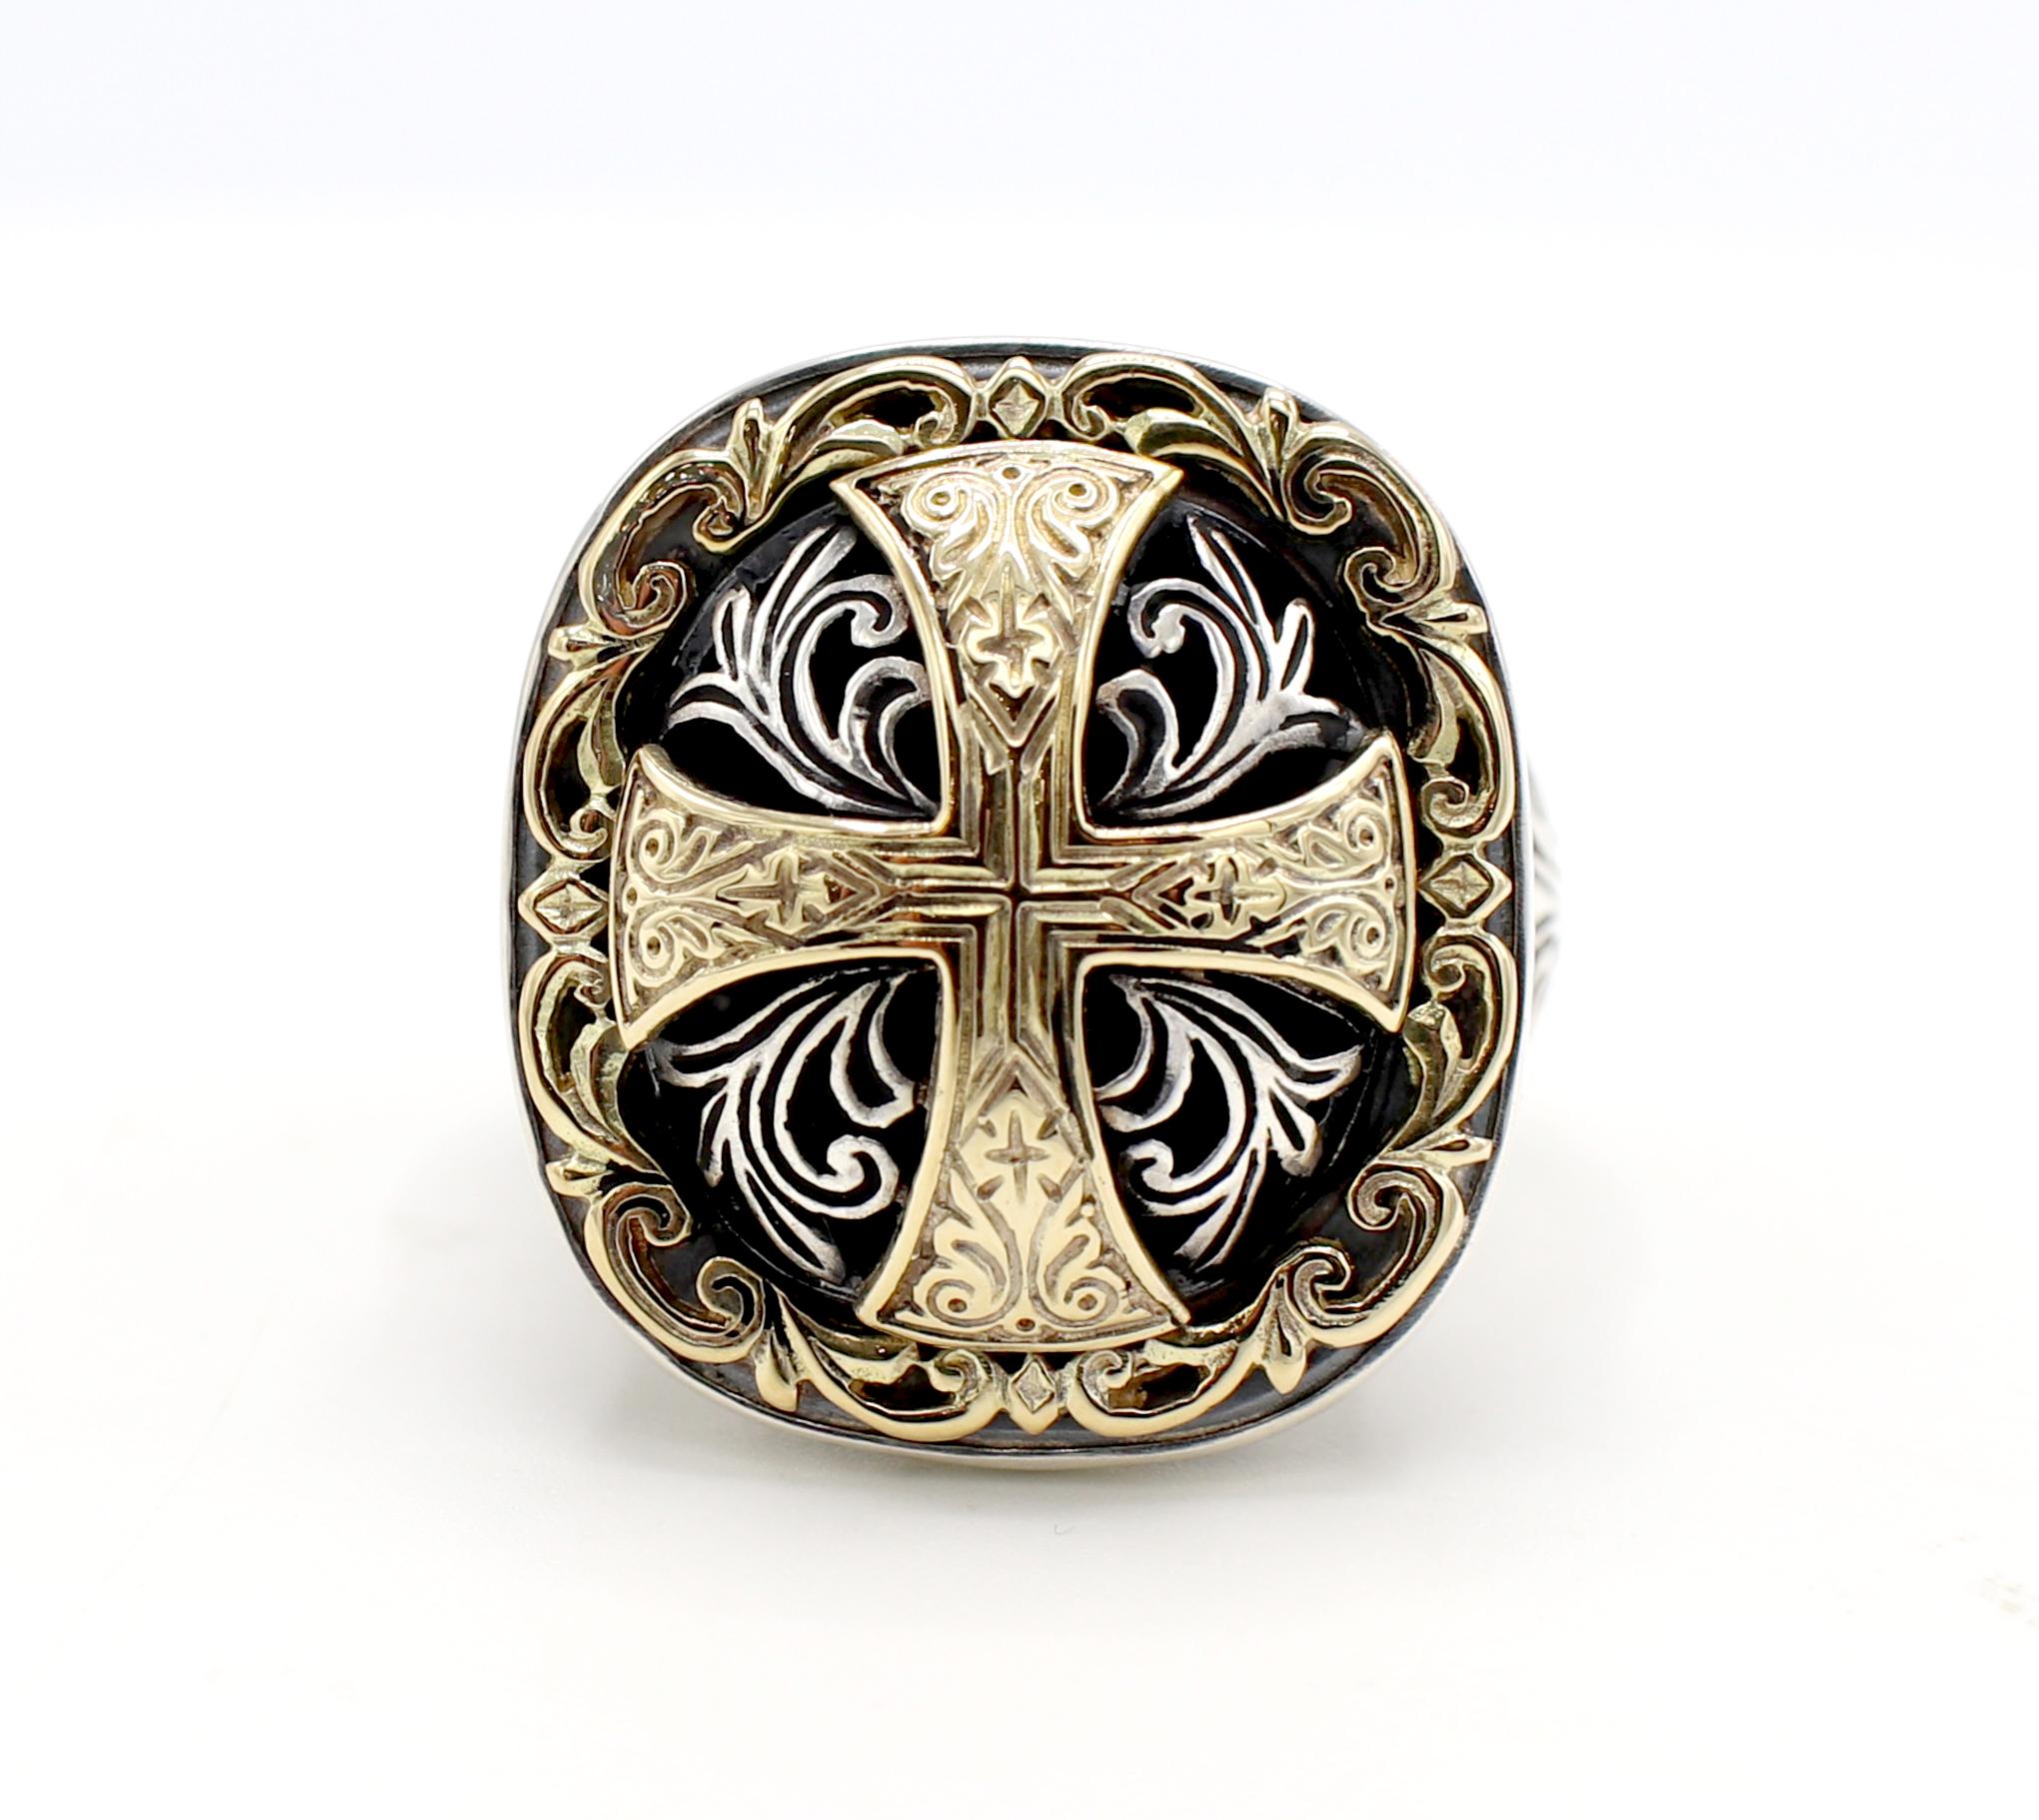 Konstantino Classics Maltese Cross Sterling Silver & 18 Karat Yellow Gold Ring 
Metal: Sterling silver & 18k yellow gold
Weight: 17.2 grams
Top: 23 x 21mm
Size: 7 (US)
